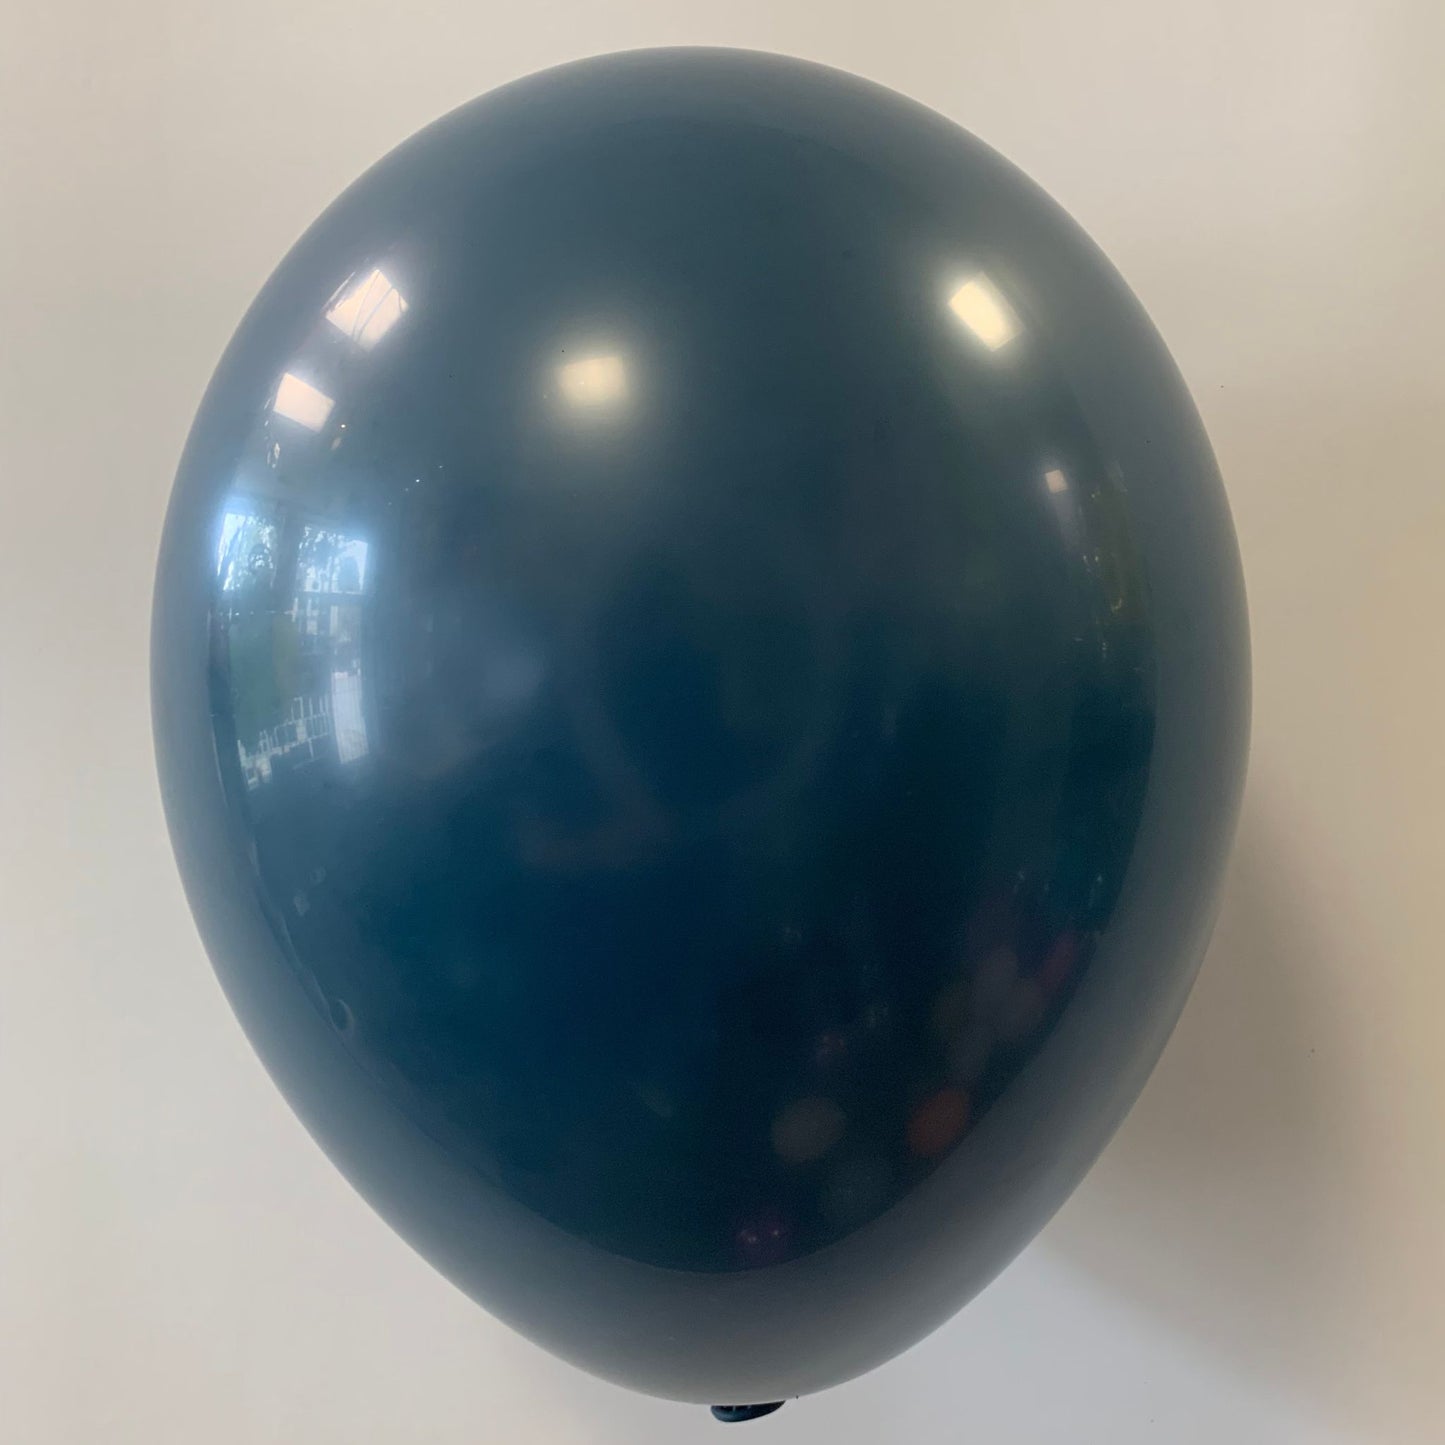 11 inch helium filled Naval latex balloon